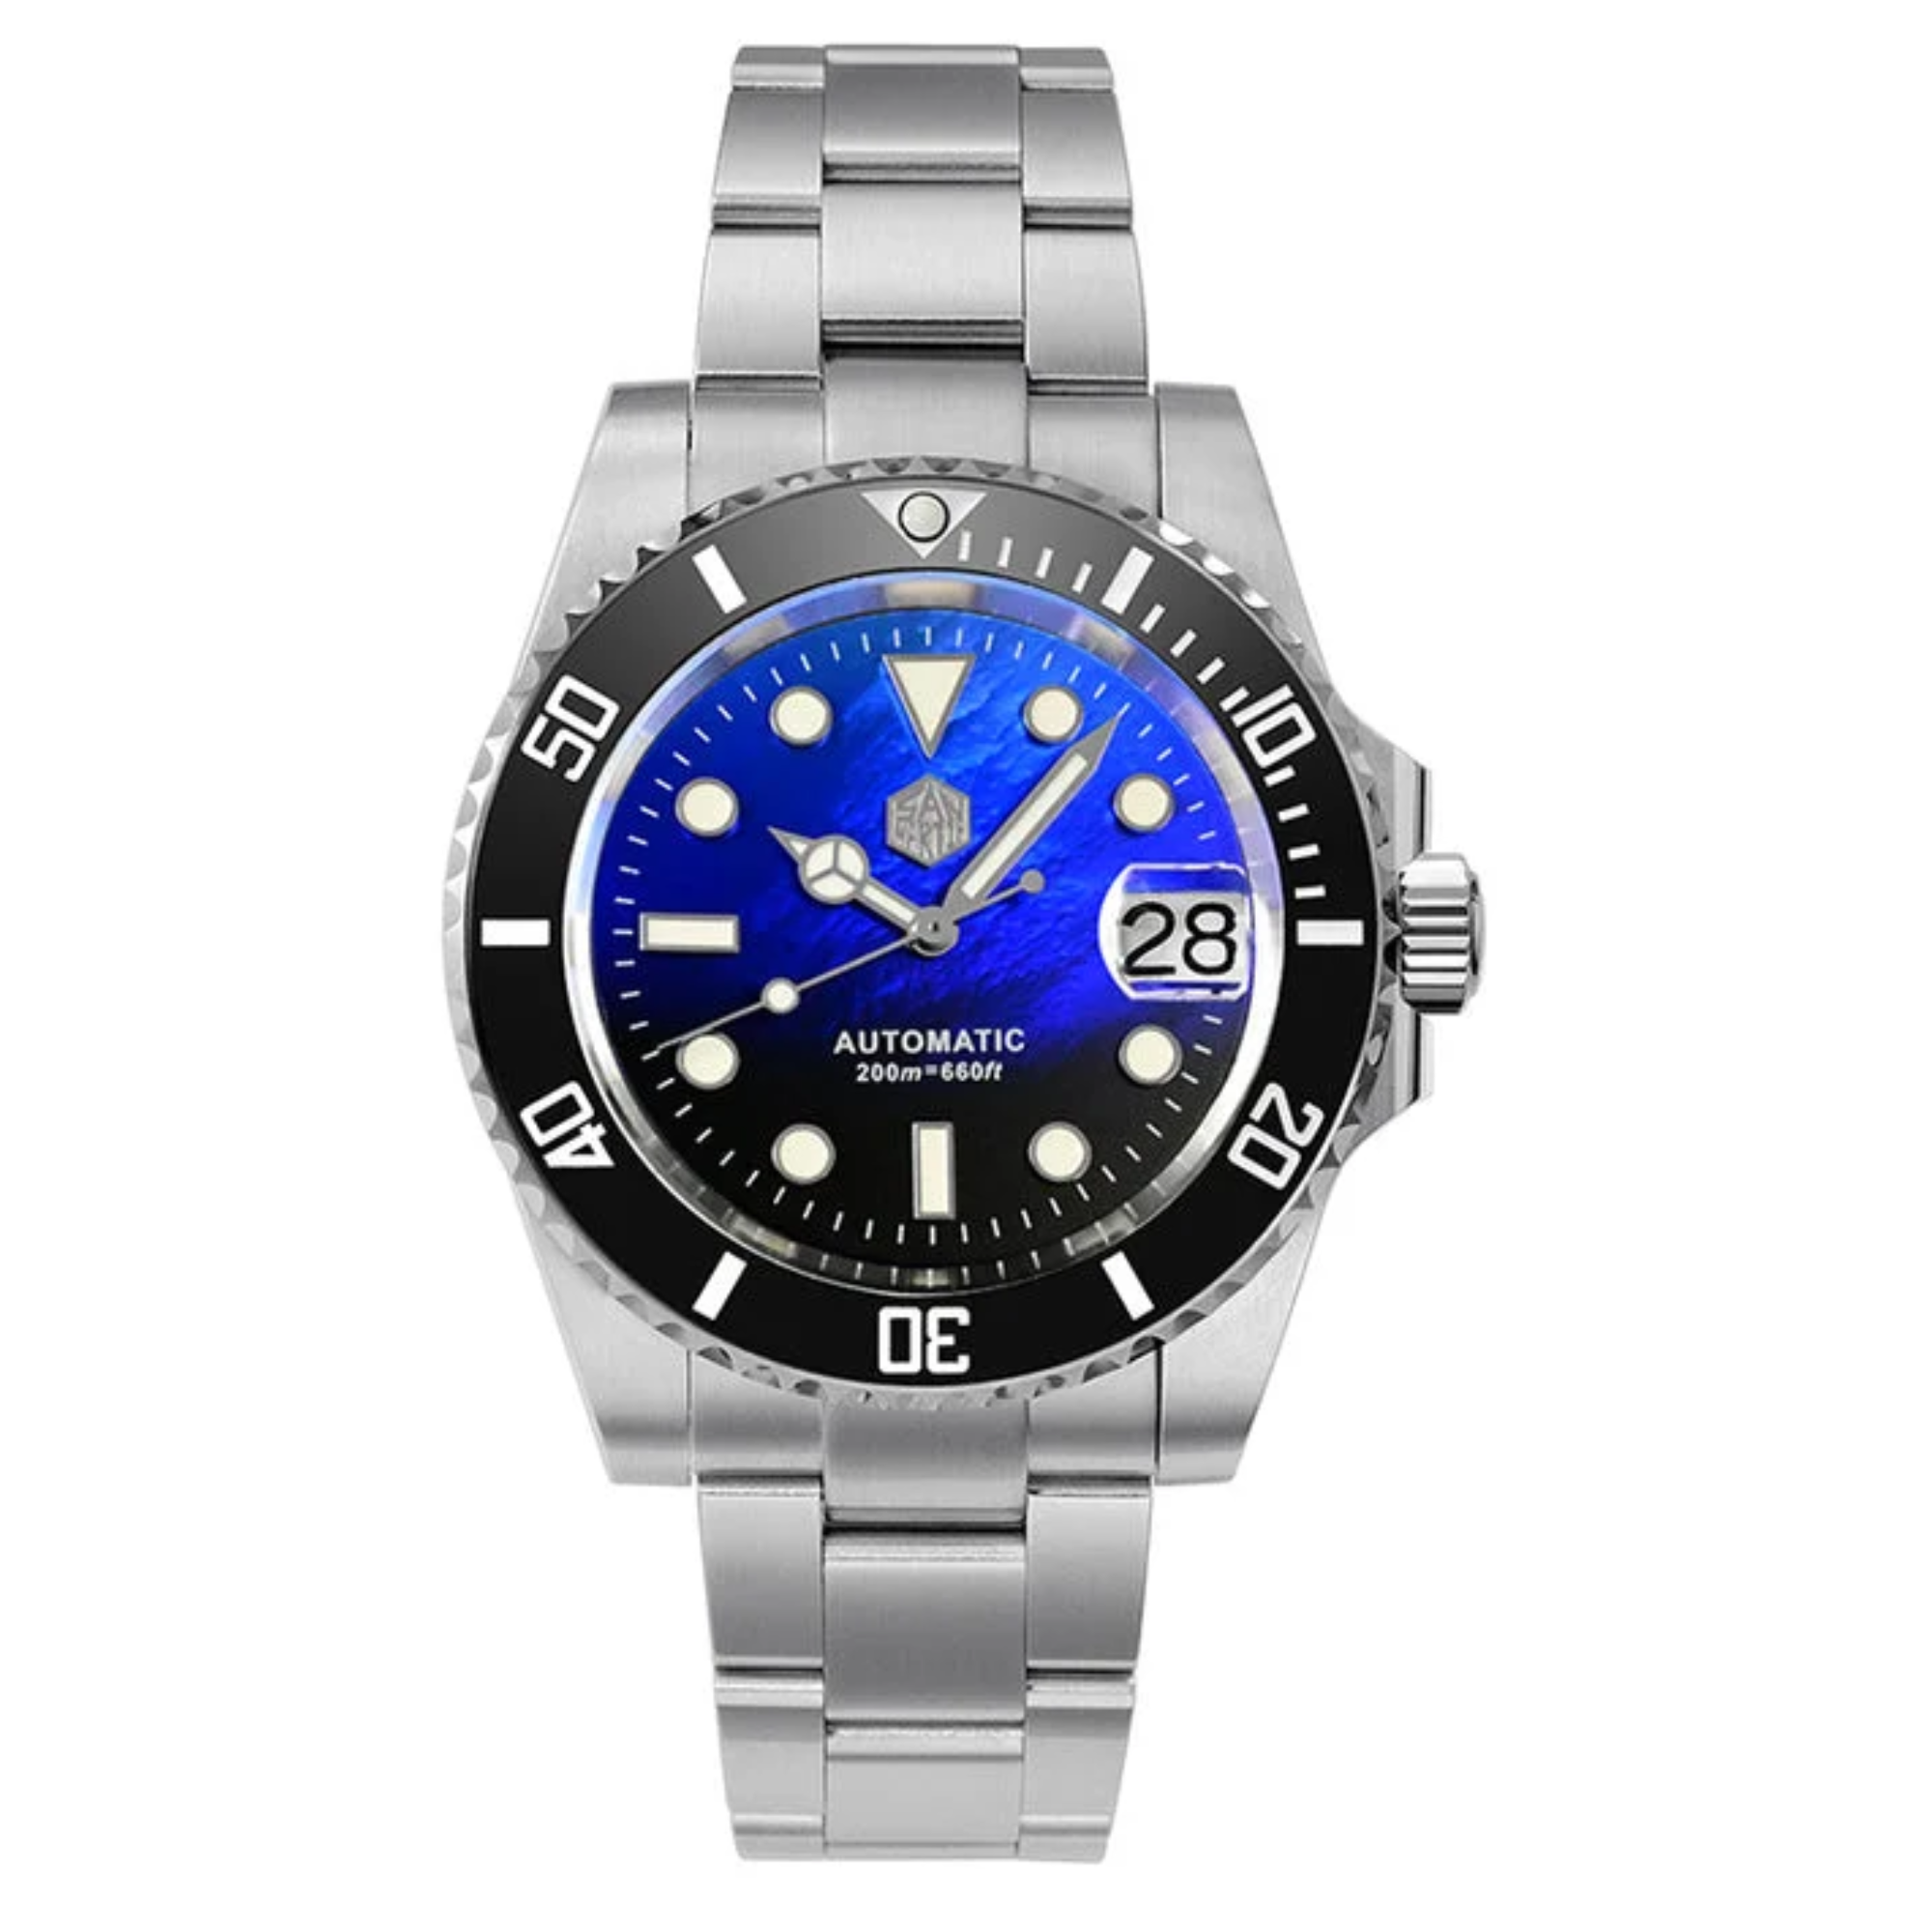 San Martin Sub Diver Watch SN017-V3 - Mother Of Pearl san martin watches india online